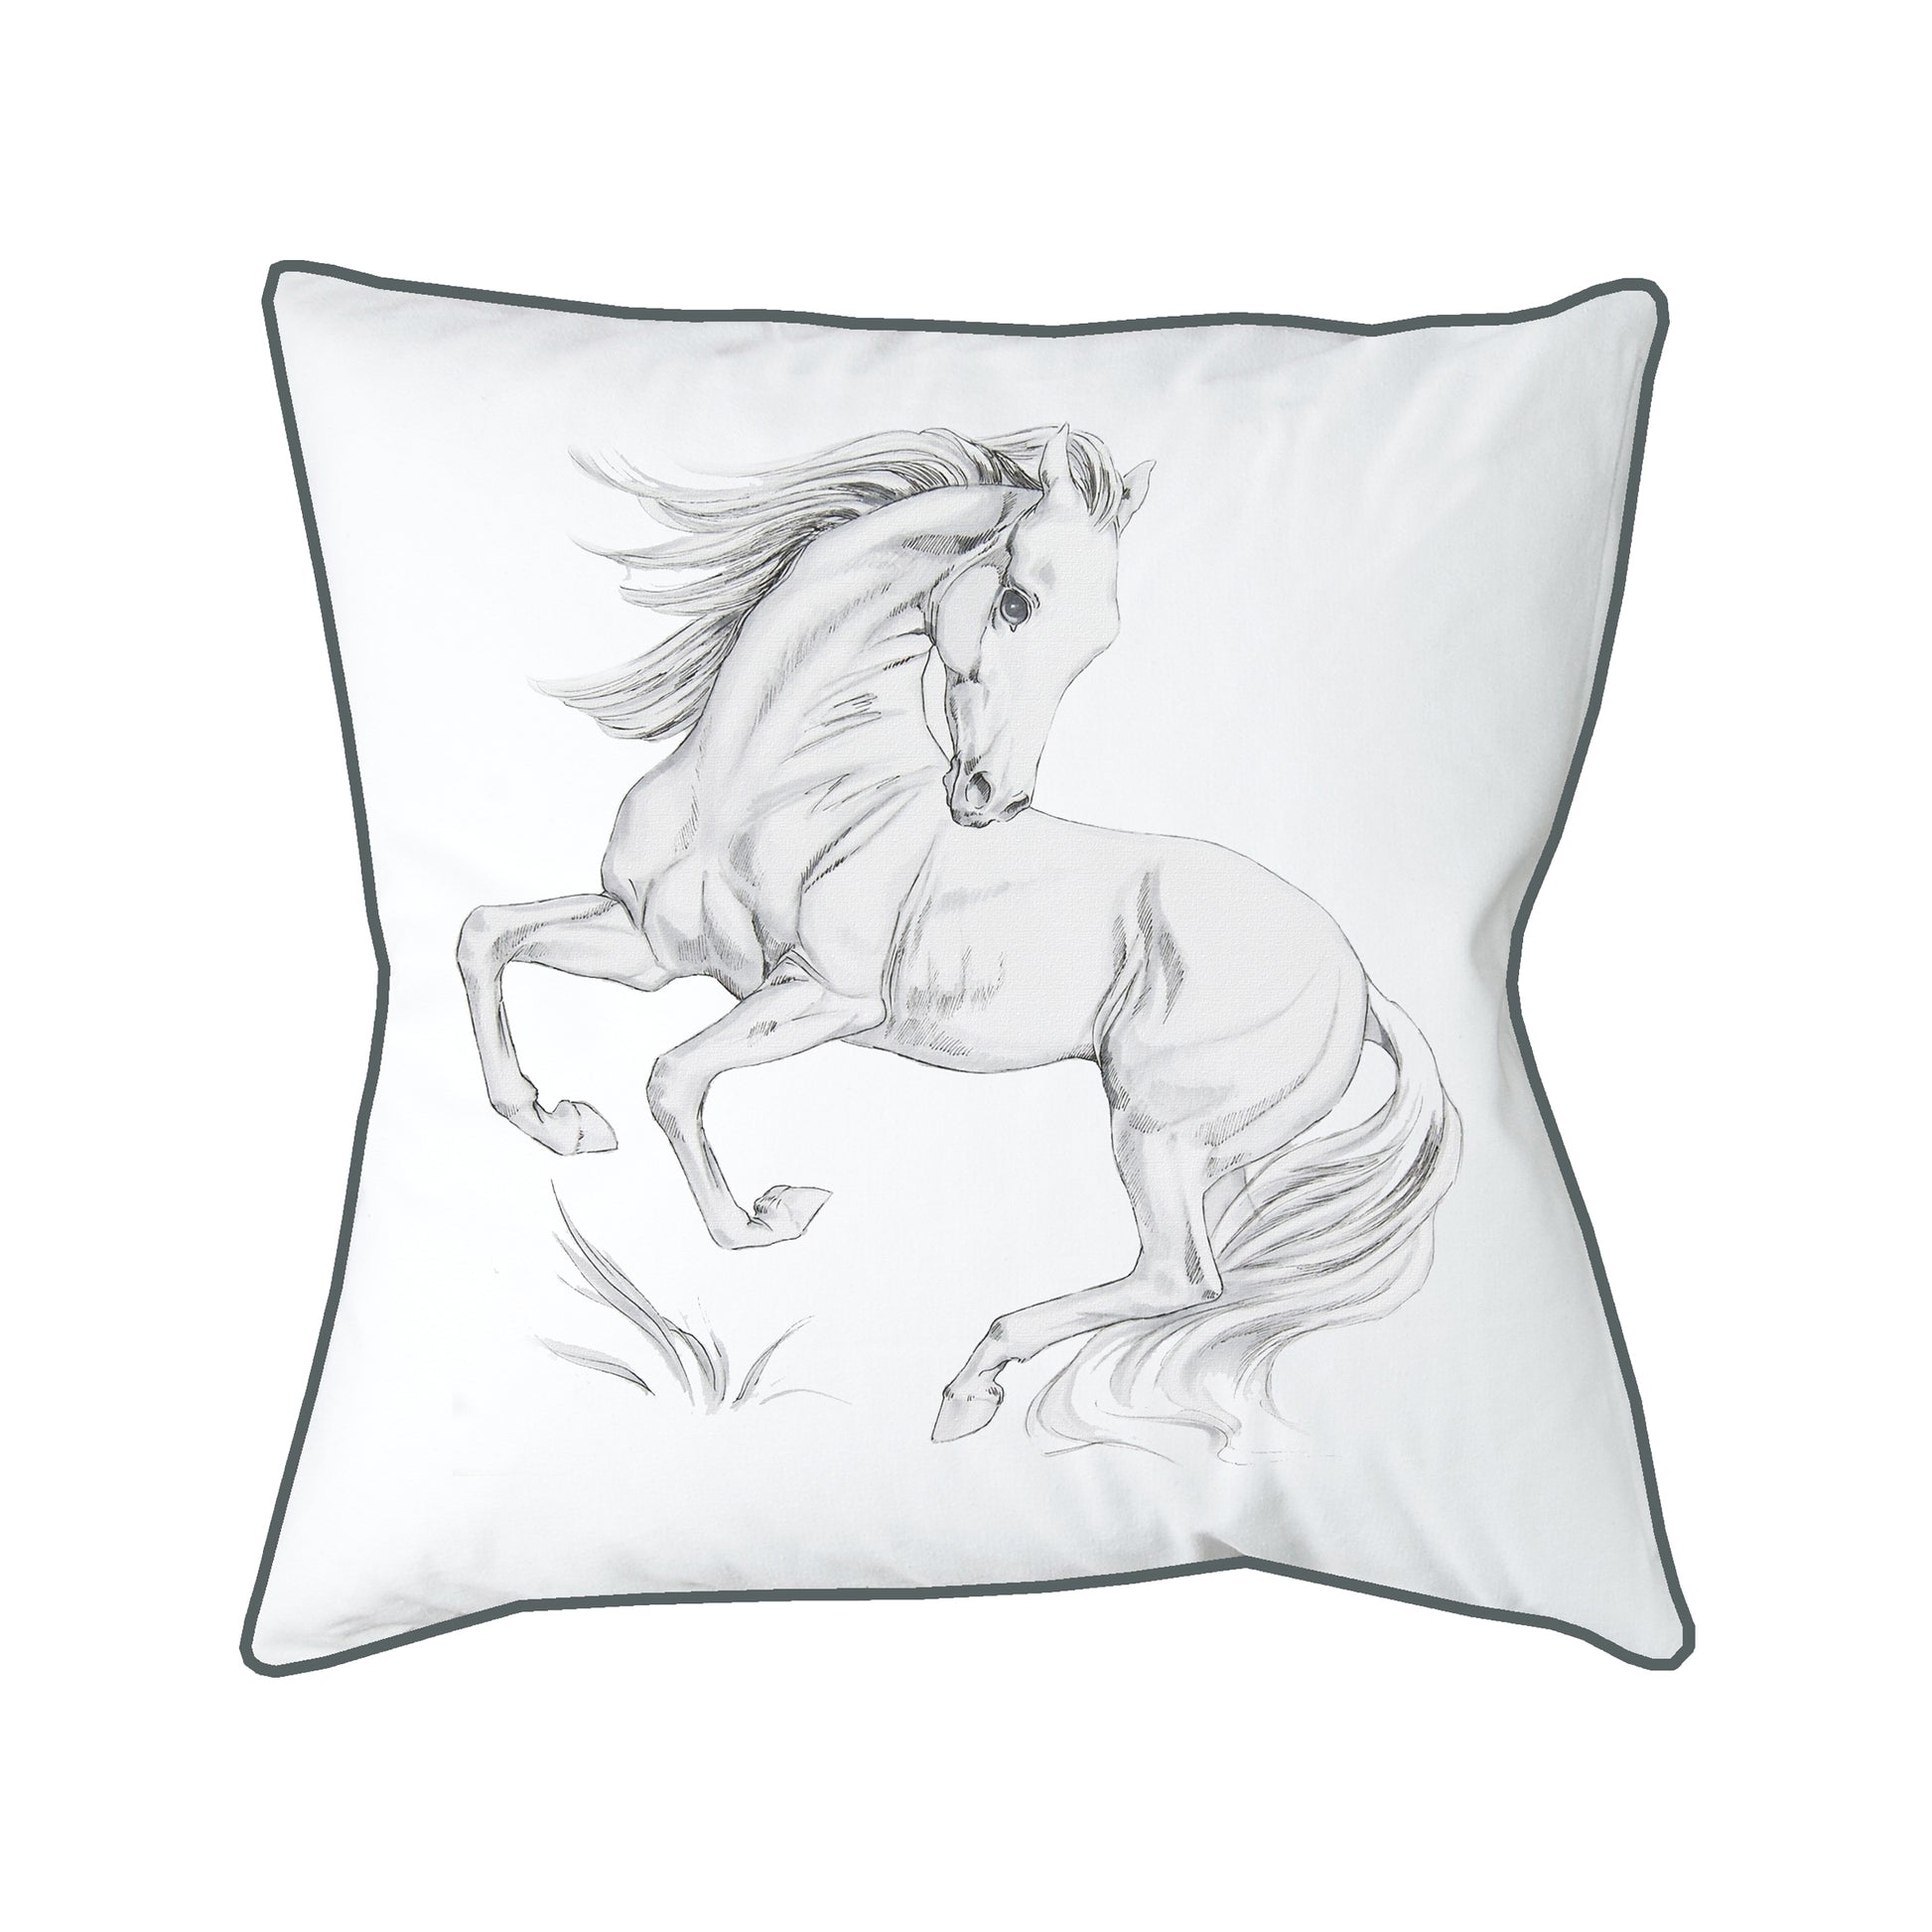 A rearing horse embroidered on a white background, finished with gray piped edges.